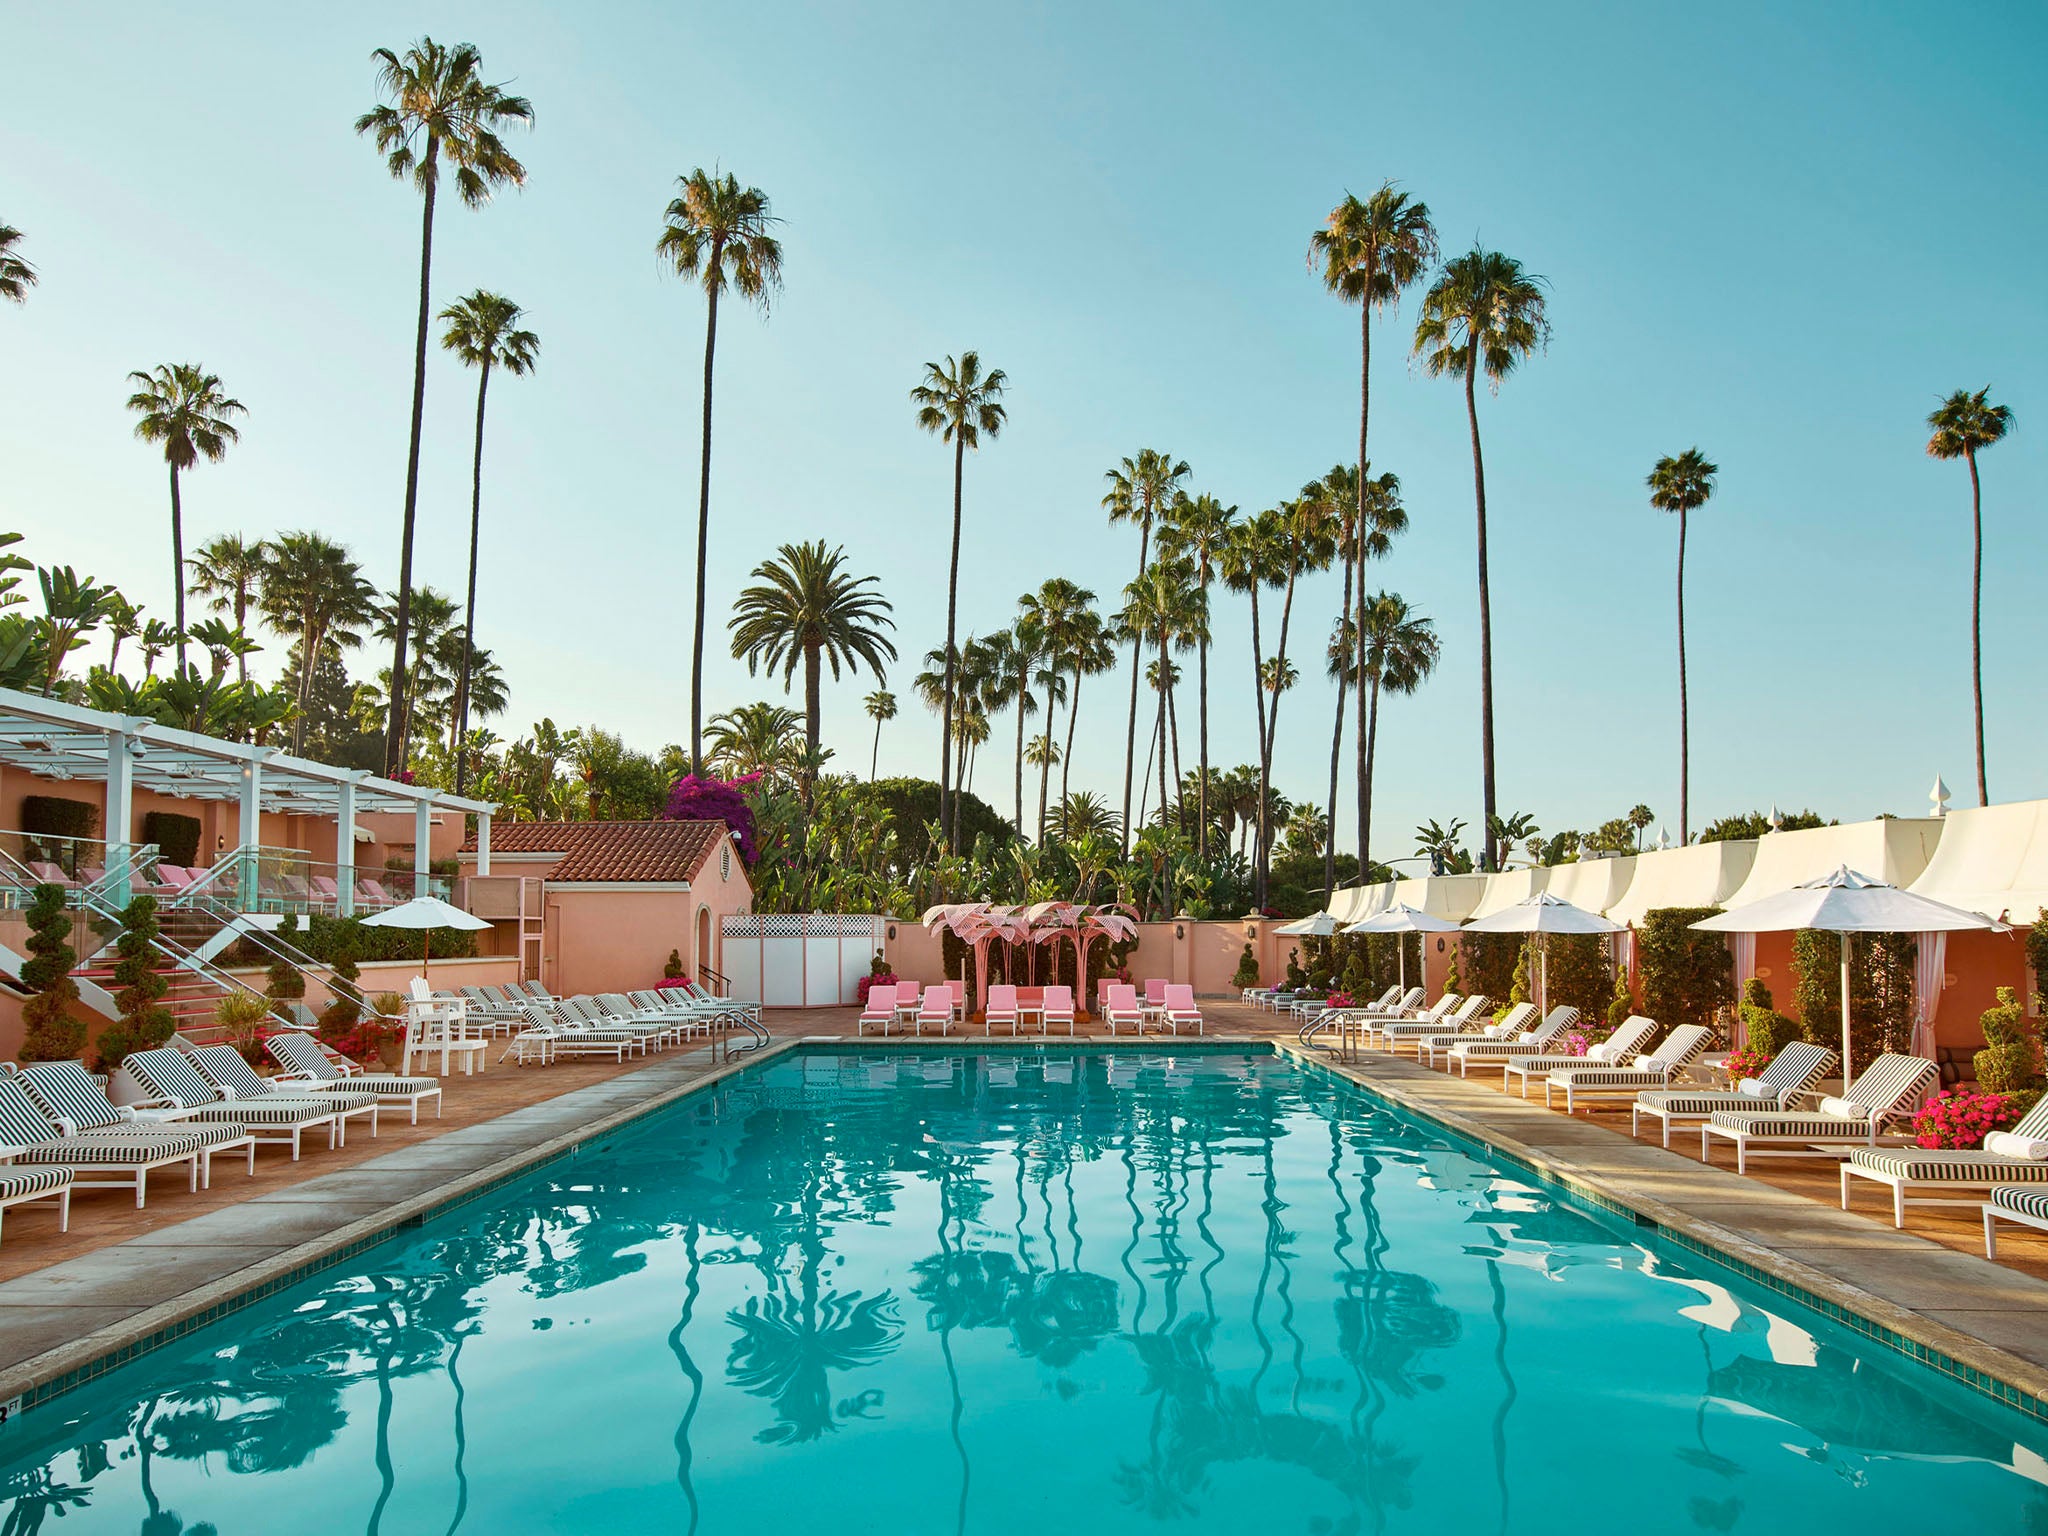 The Best Hotels in West Hollywood, CA